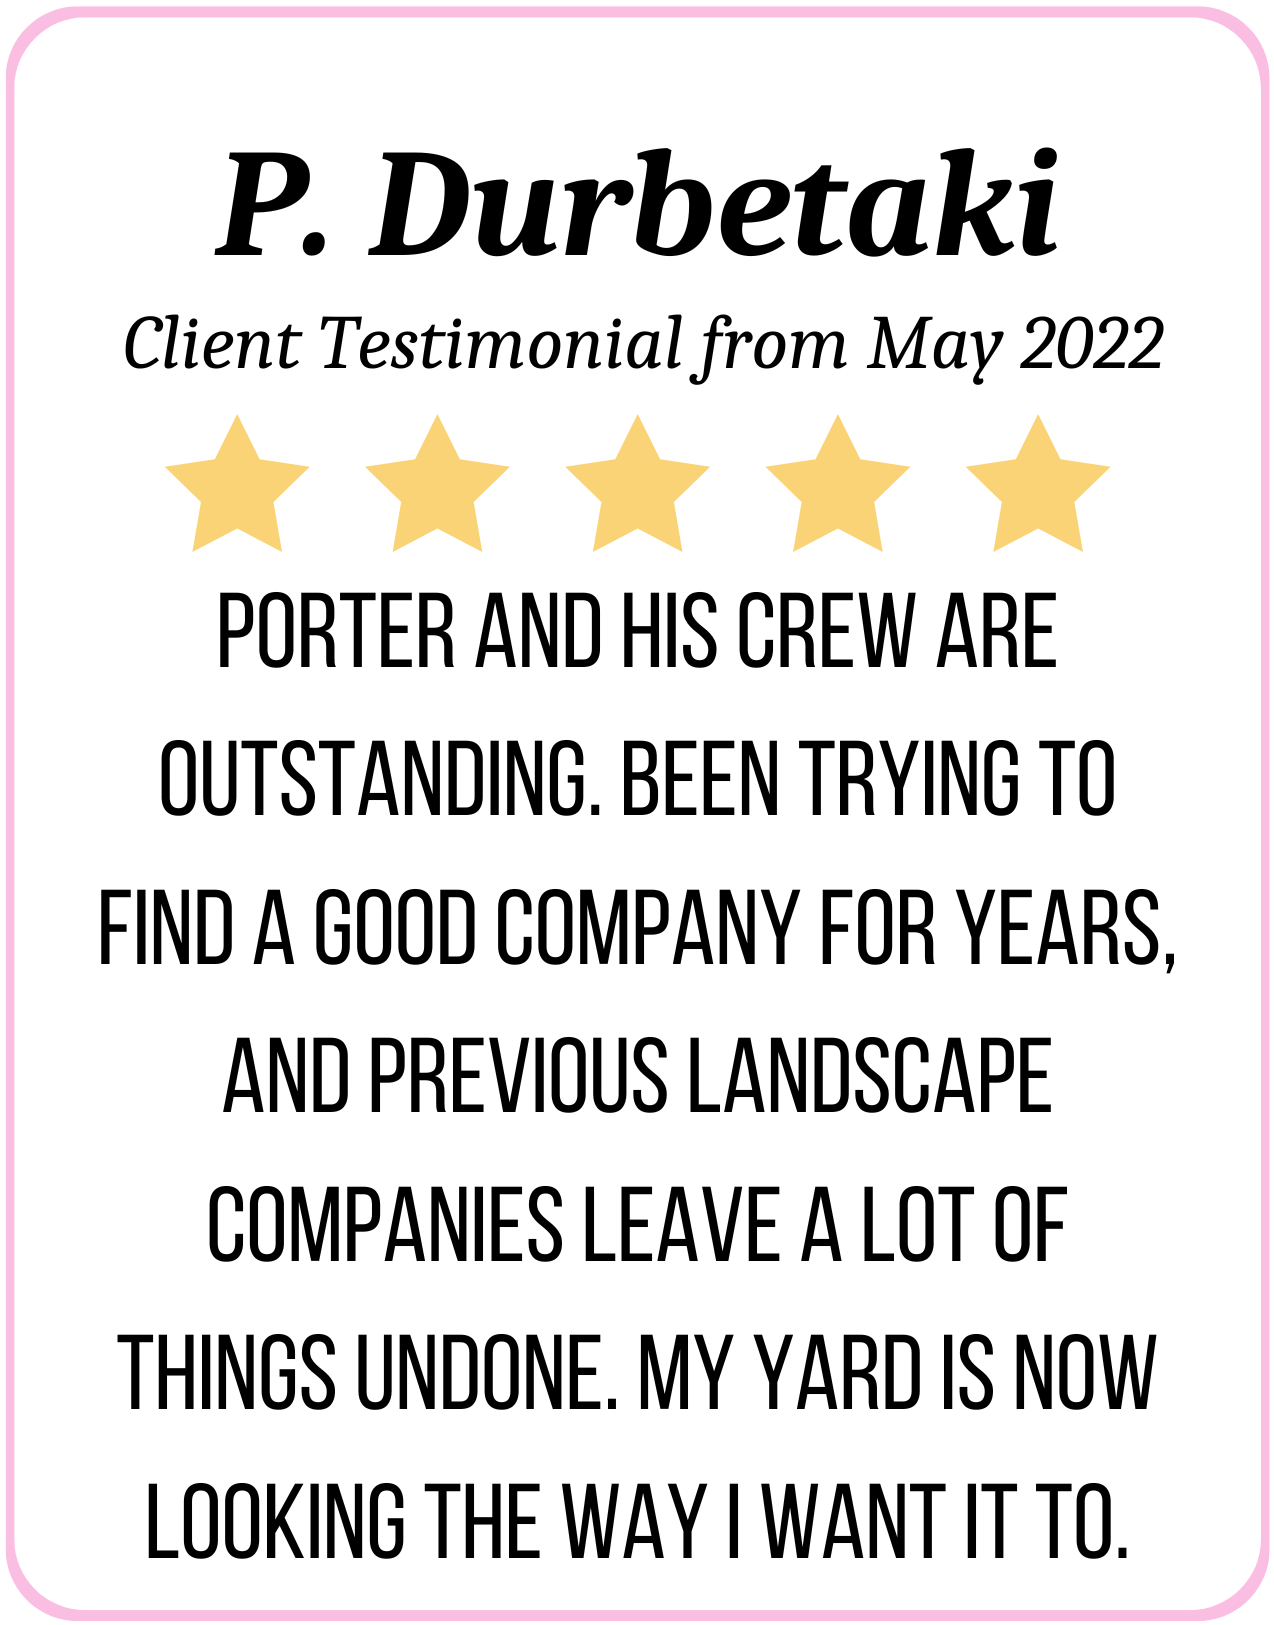 5 Stars: Porter and his crew are outstanding. Been trying to find a good company for years, and previous landscape companies leave a lot of things undone. My yard is now looking the way I want it to. - P. Durbetaki May 2022